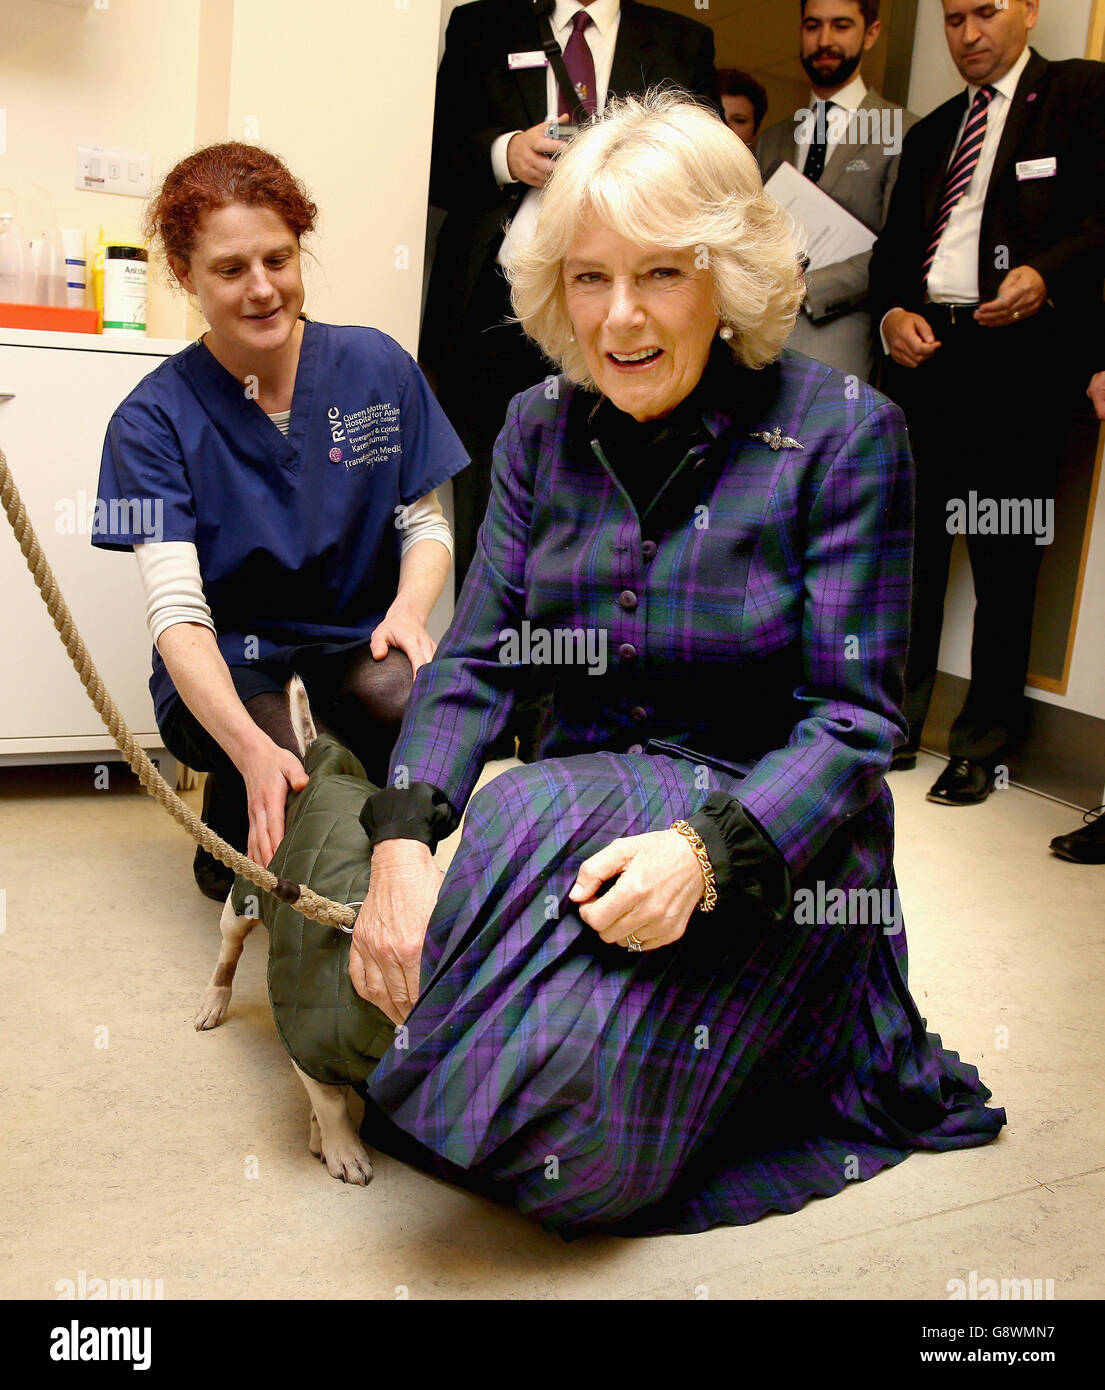 The Duchess of Cornwall, patron of the Royal Veterinary College Animal Care Trust (ACT), meets a dog called Kinggy Leung who recently recieved a blood donation, during a visit to the Queen Mother Hospital for Small Animals to celebrate its 30th anniversary, during which she saw how ACT funds are helping to support state of the art care. Stock Photo